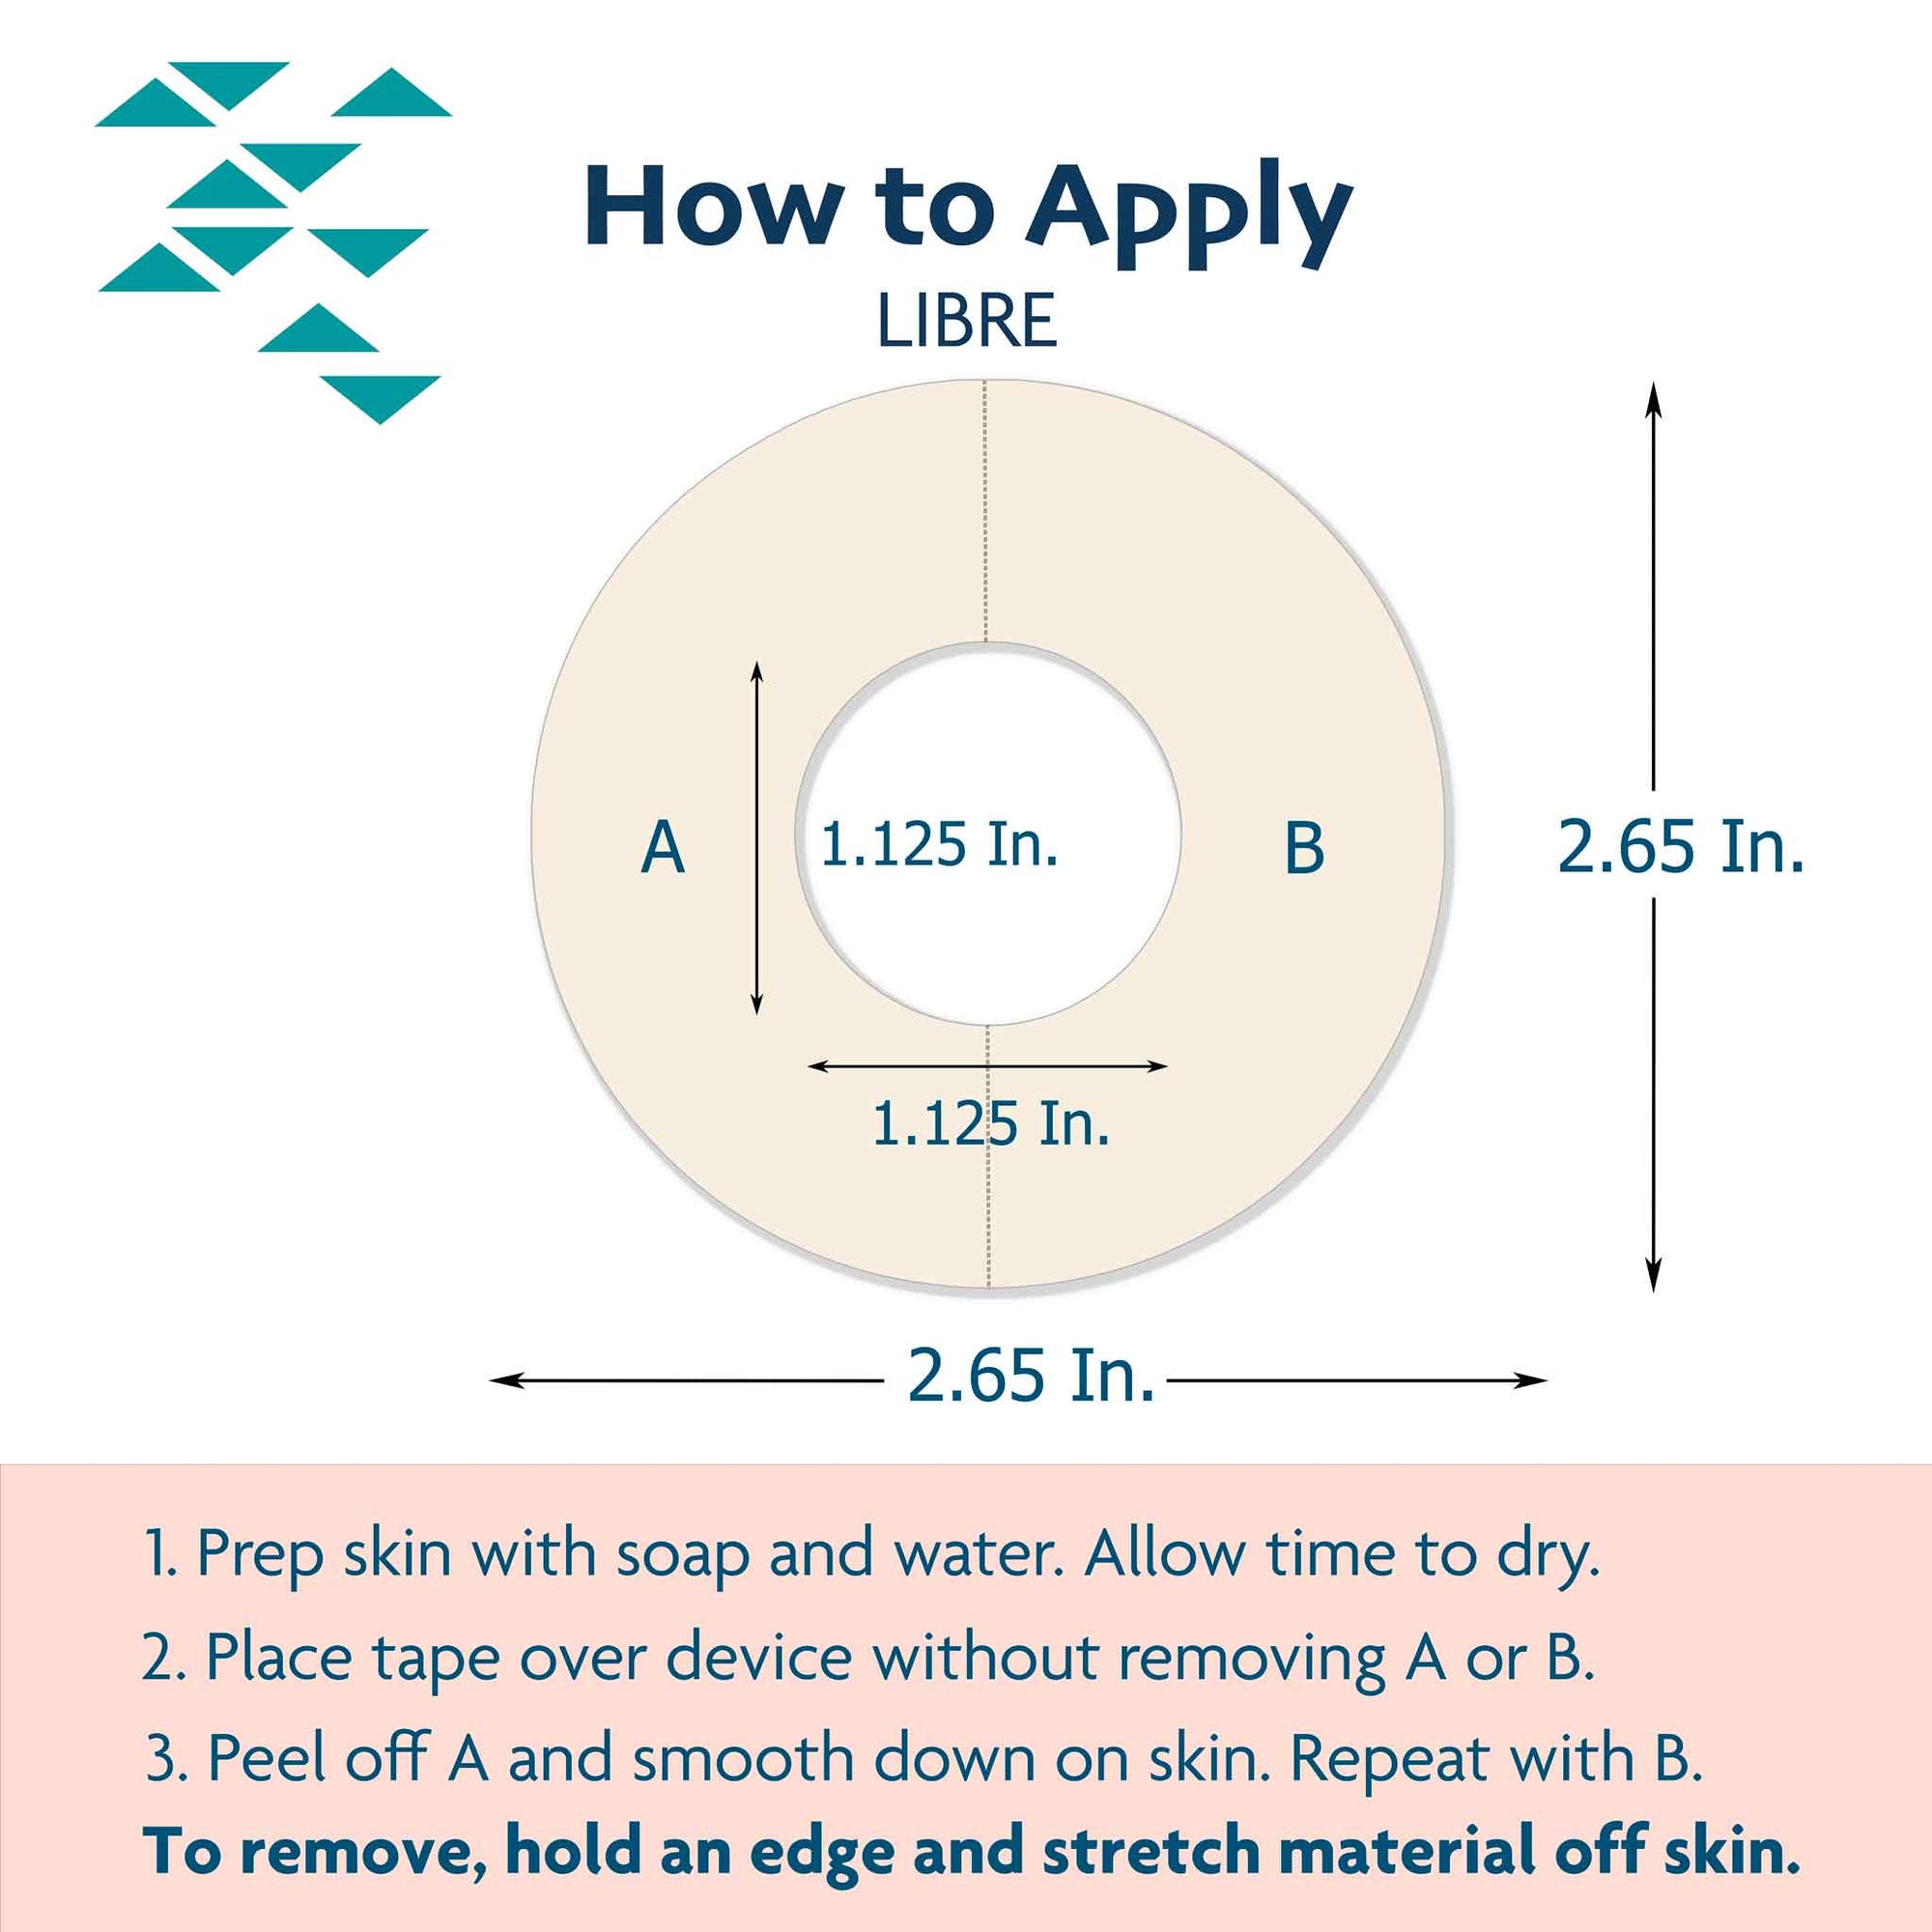 How to cover libre freestyle with adhesive patch, Abbott Lingo